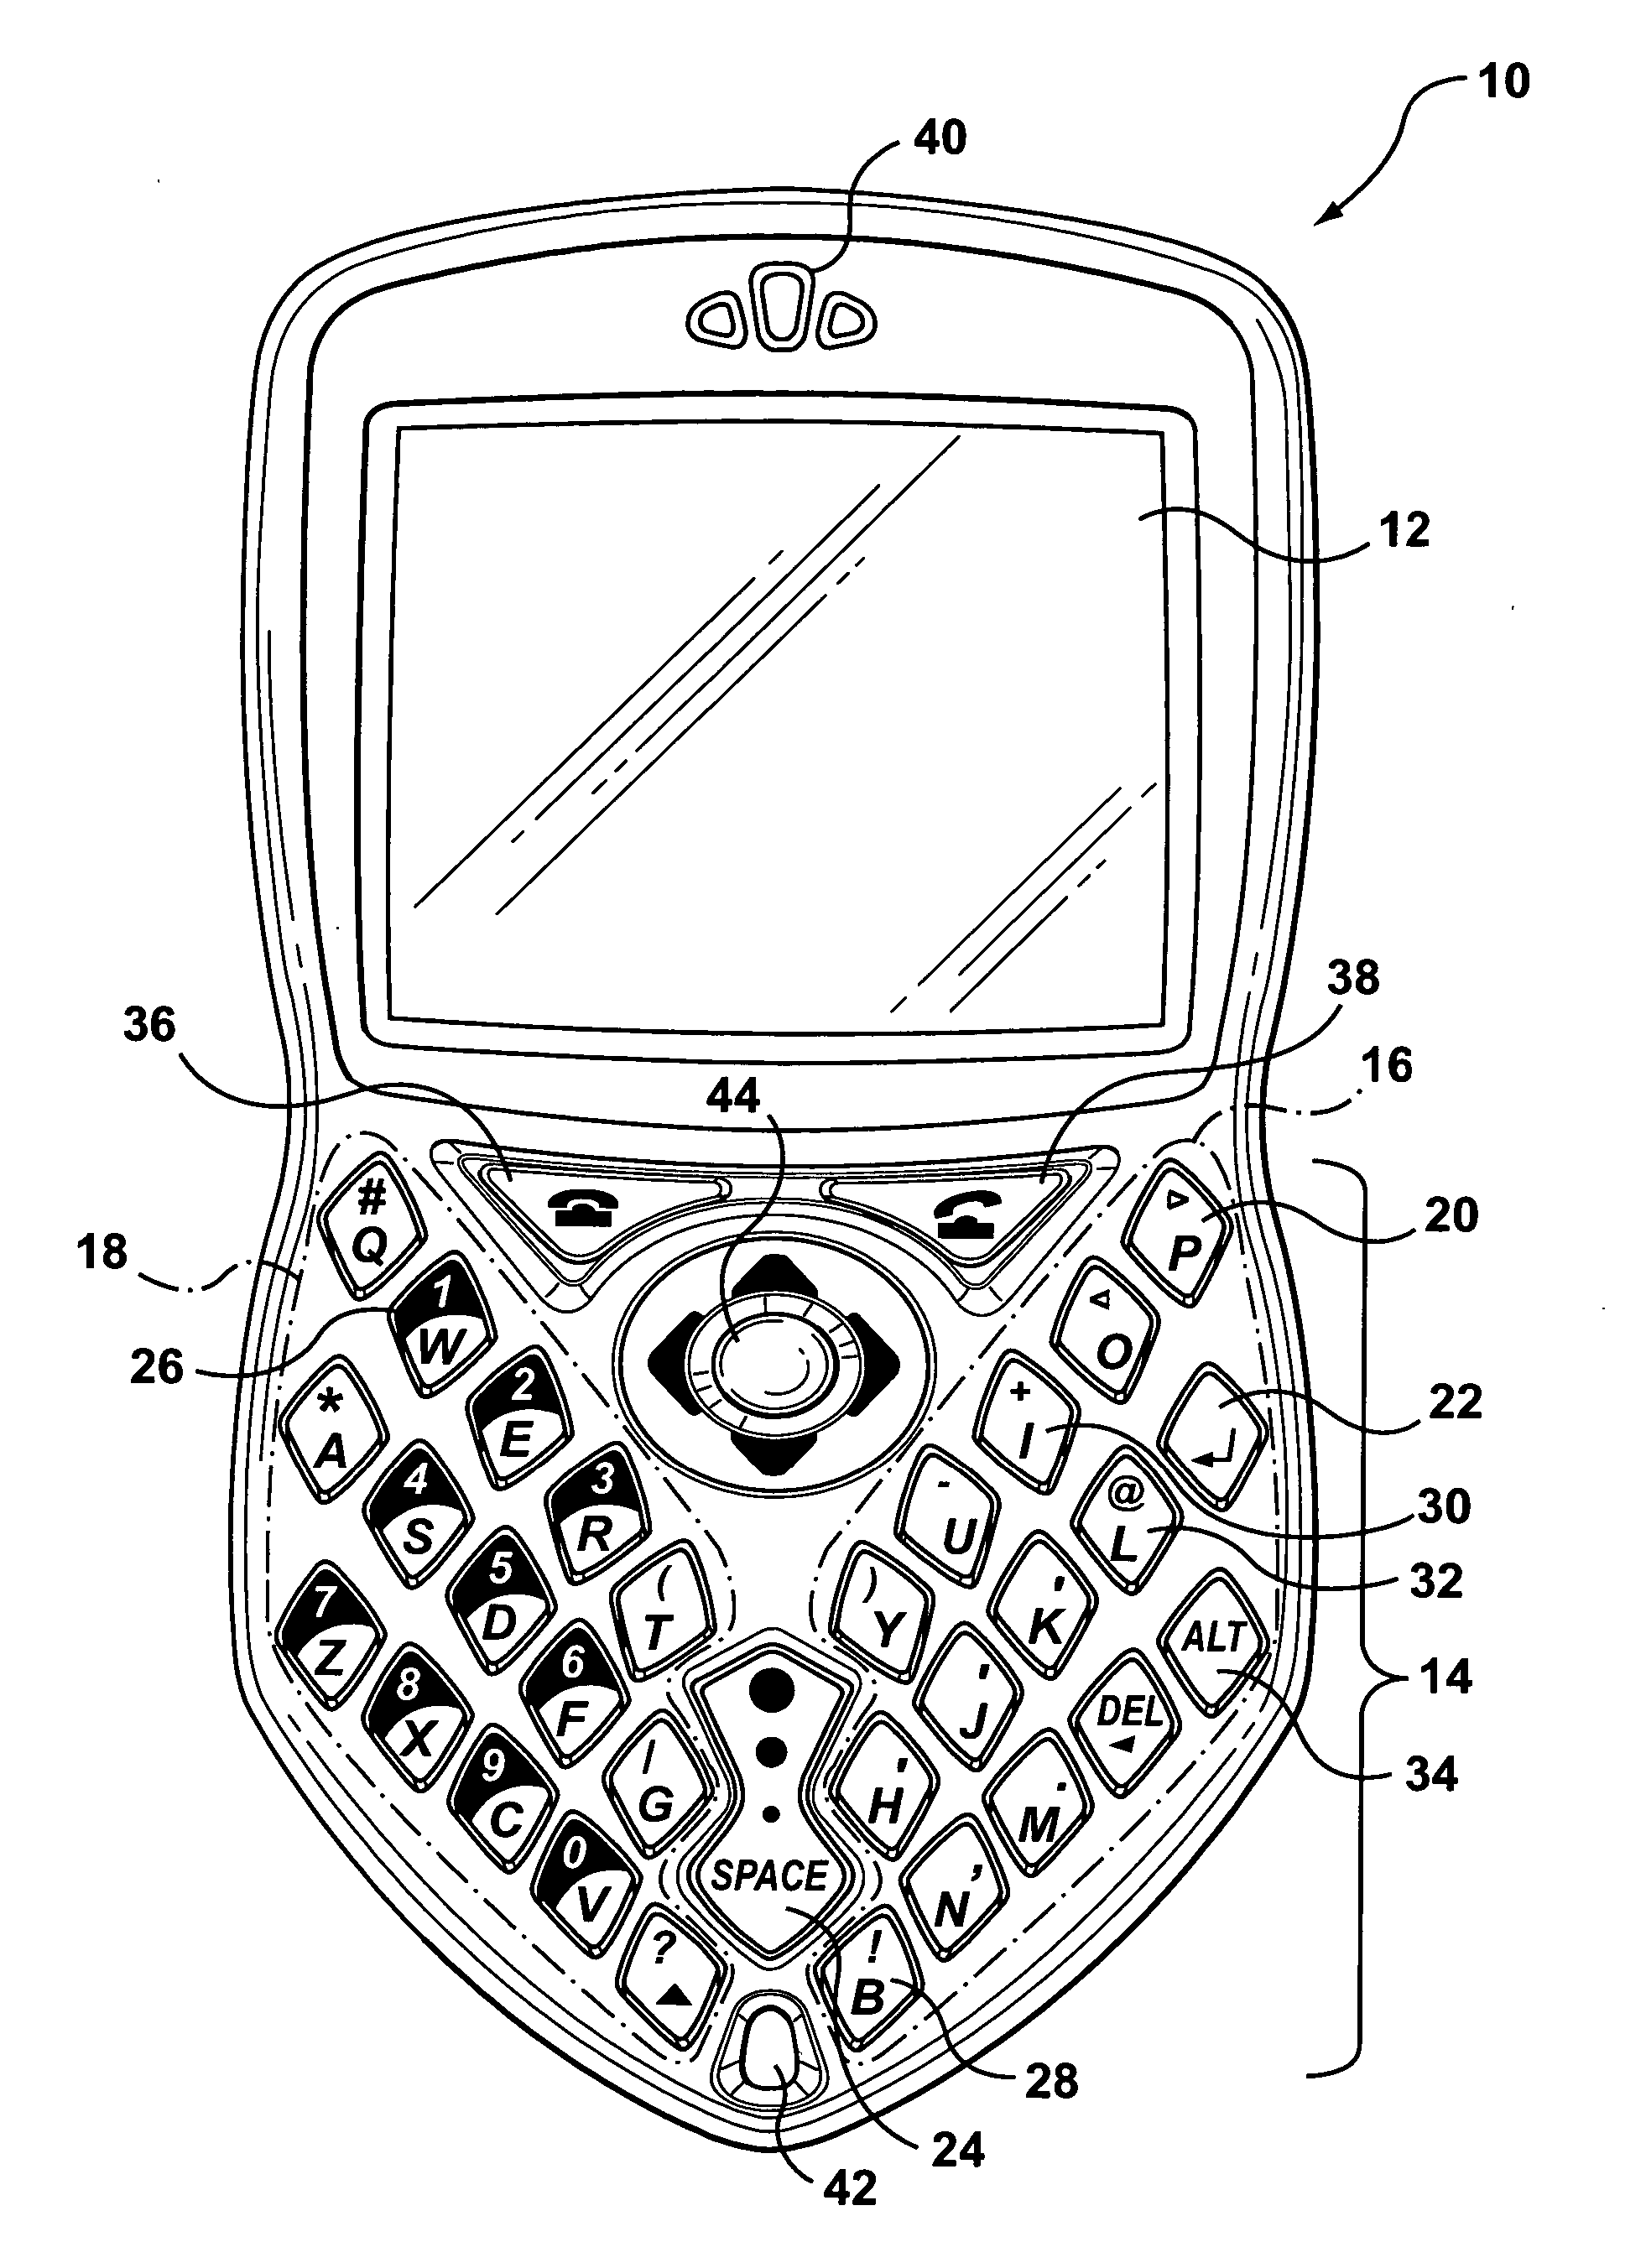 Keyboard arrangement for handheld electronic devices